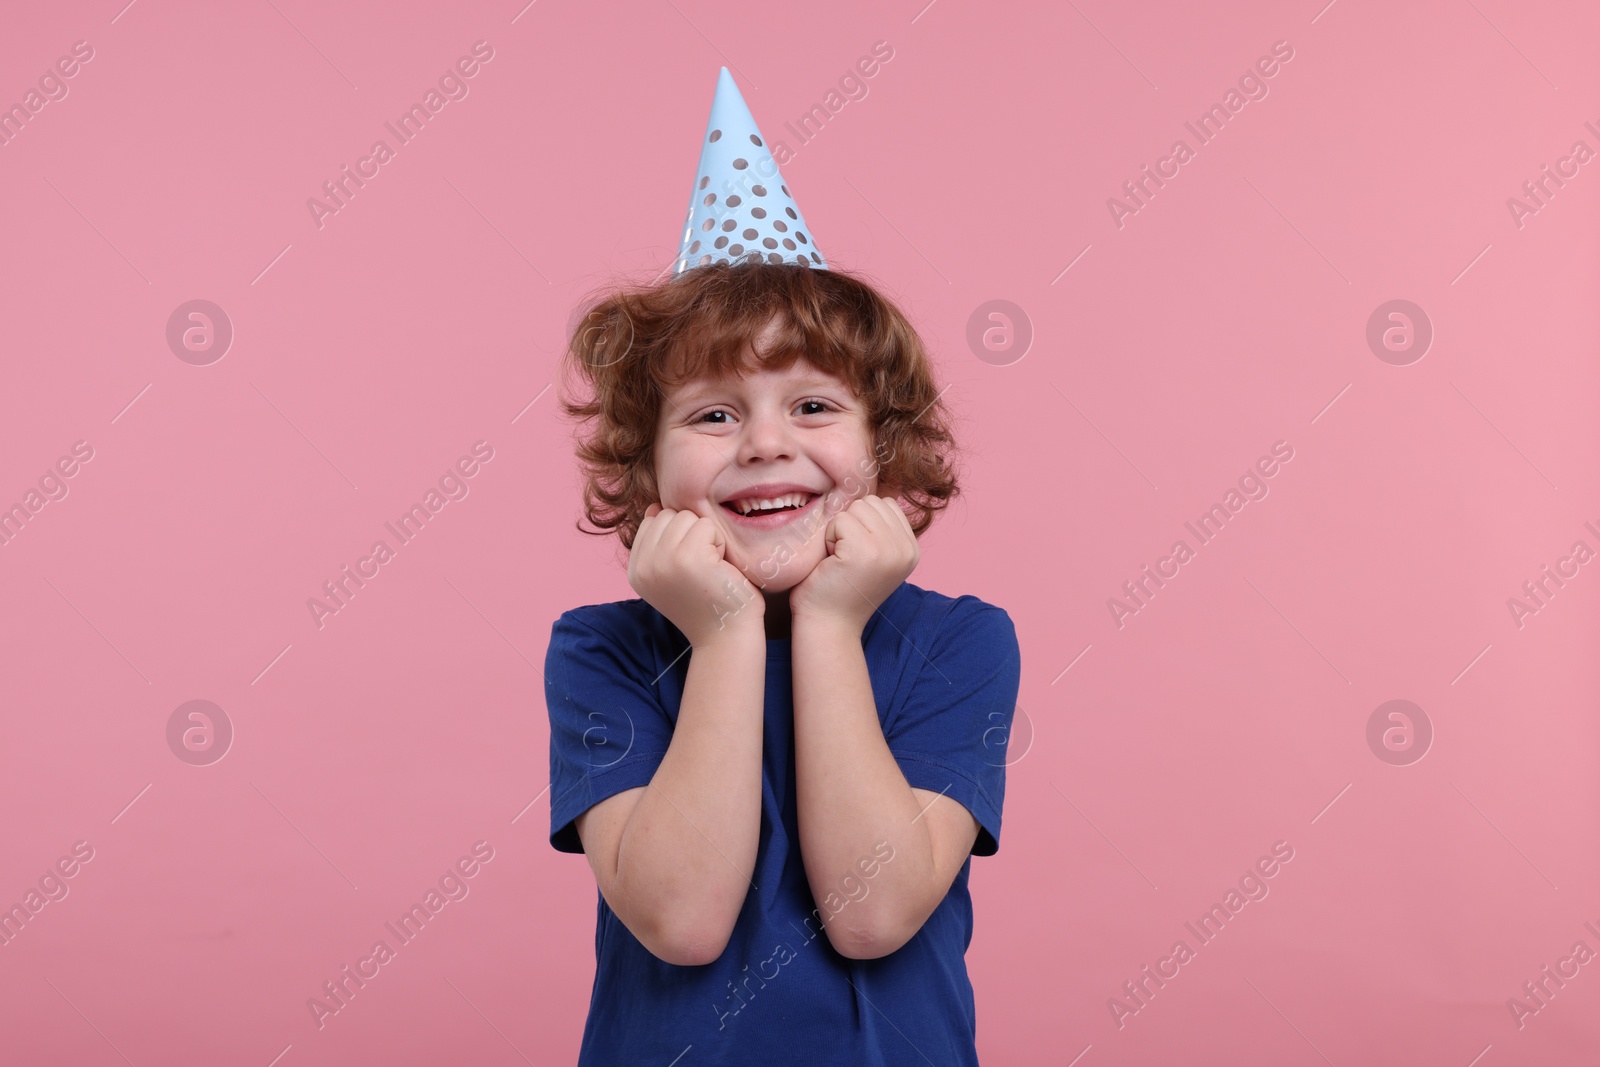 Photo of Happy little boy in party hat on pink background